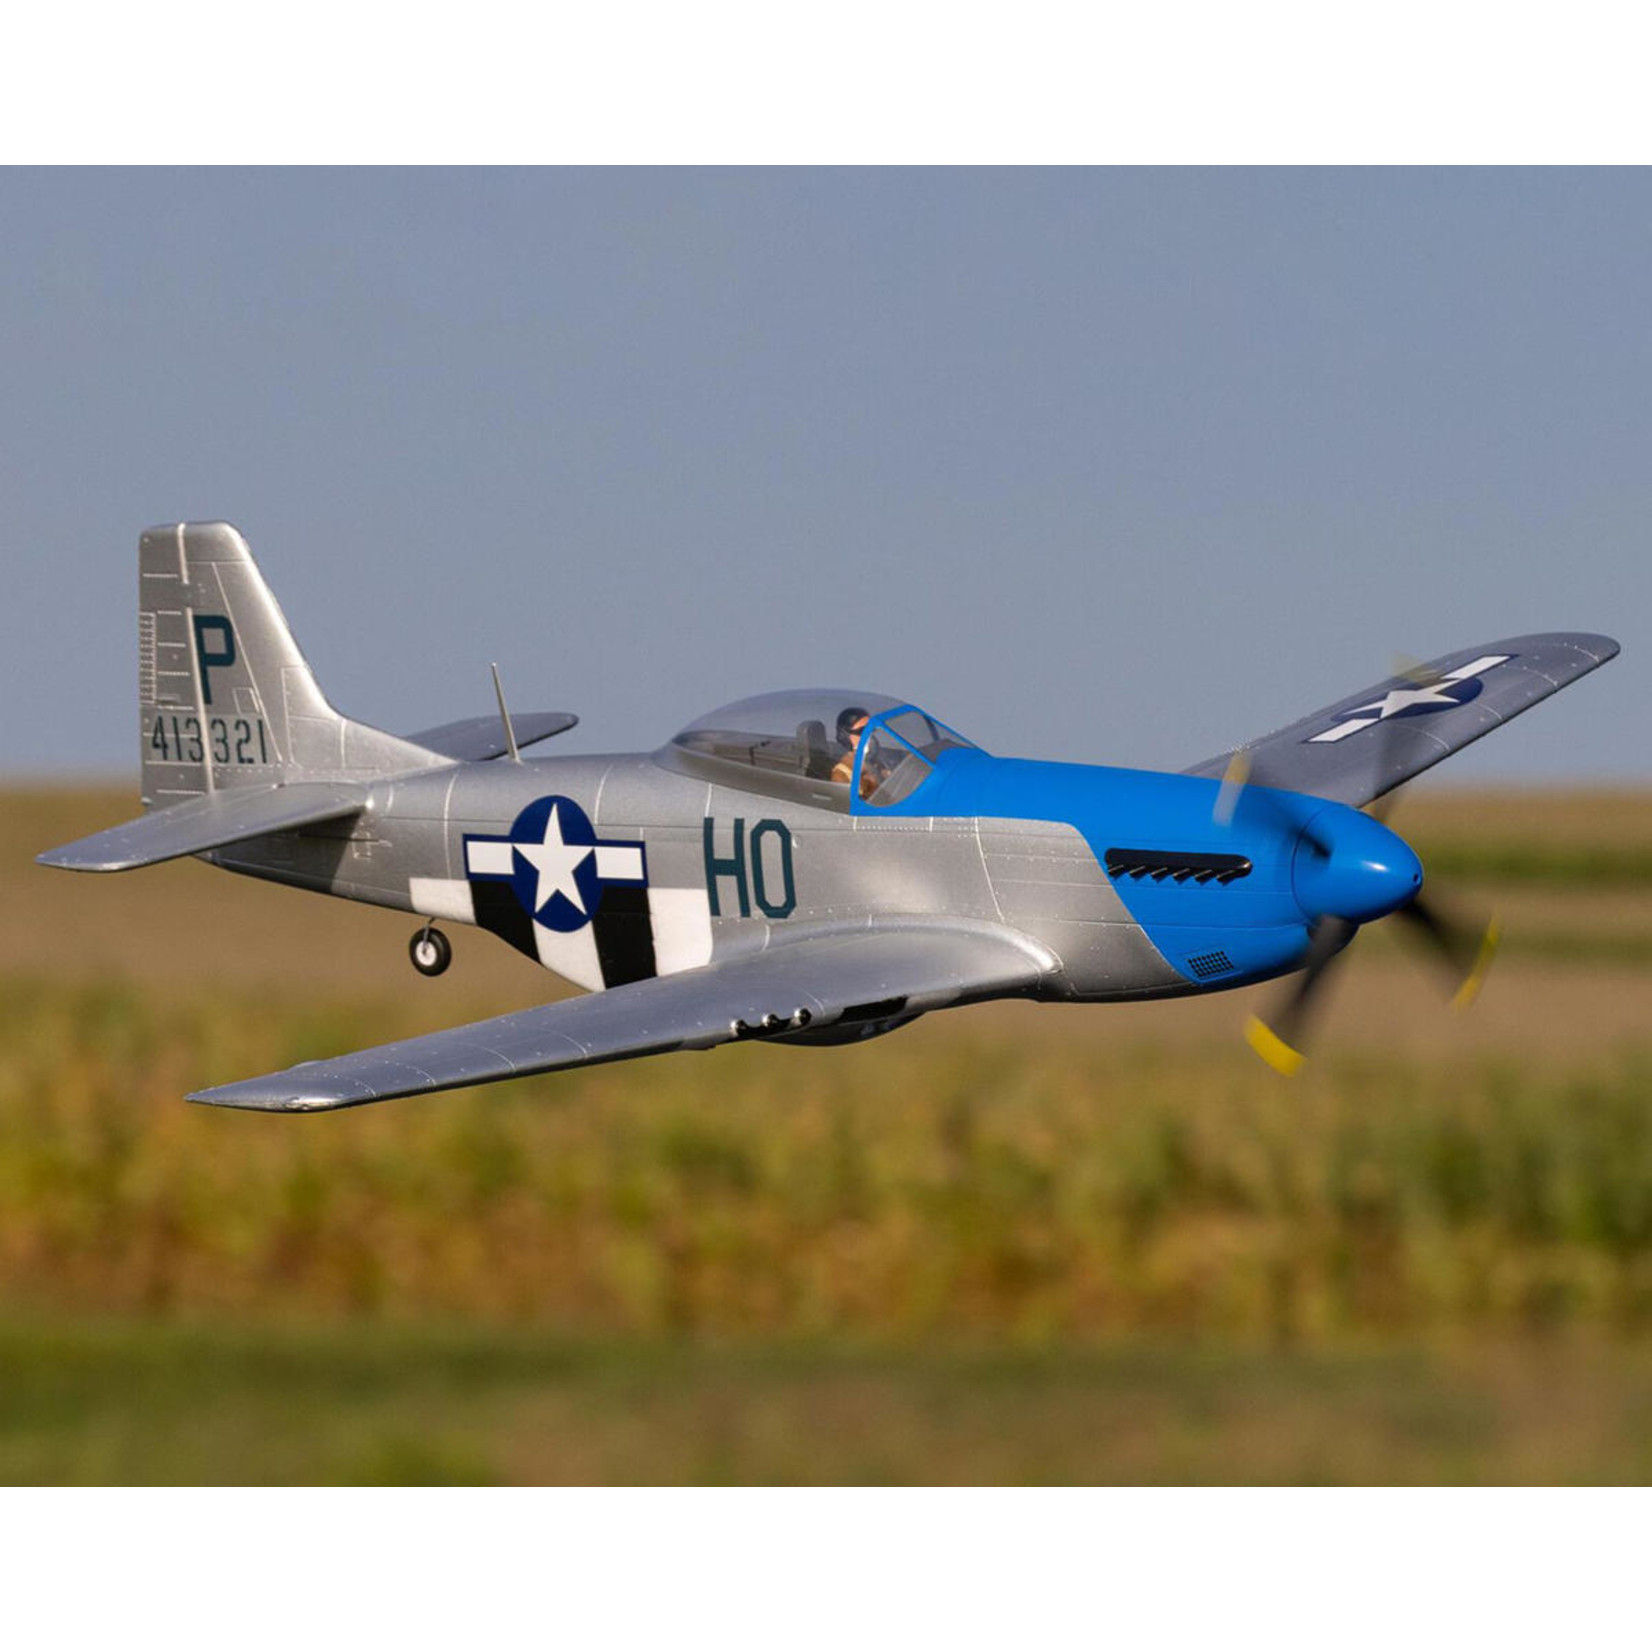 E-flite E-flite P-51D Mustang "Cripes A'Mighty 3rd" Bind-N-Fly Basic Electric Airplane w/Smart ESC, AS3X & SAFE (1200mm) #EFL089500